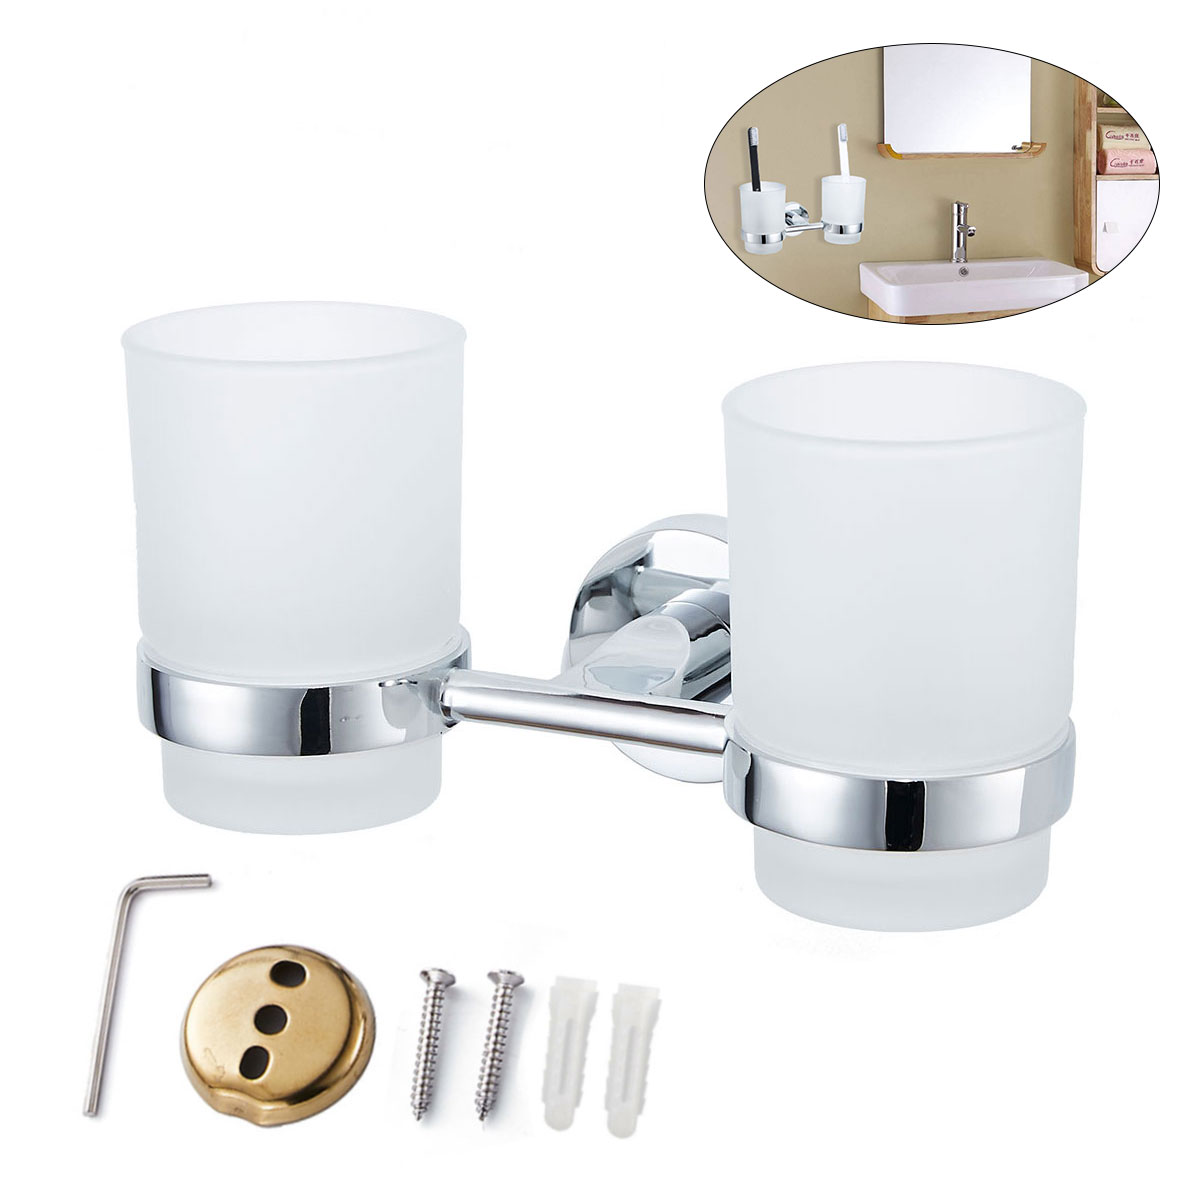 SingleDouble-Tumbler-Cup-Stainless-Steel-Toothbrush-Cup-Holder-Wall-Mounted-Toothbrush-Storage-for-B-1690420-8